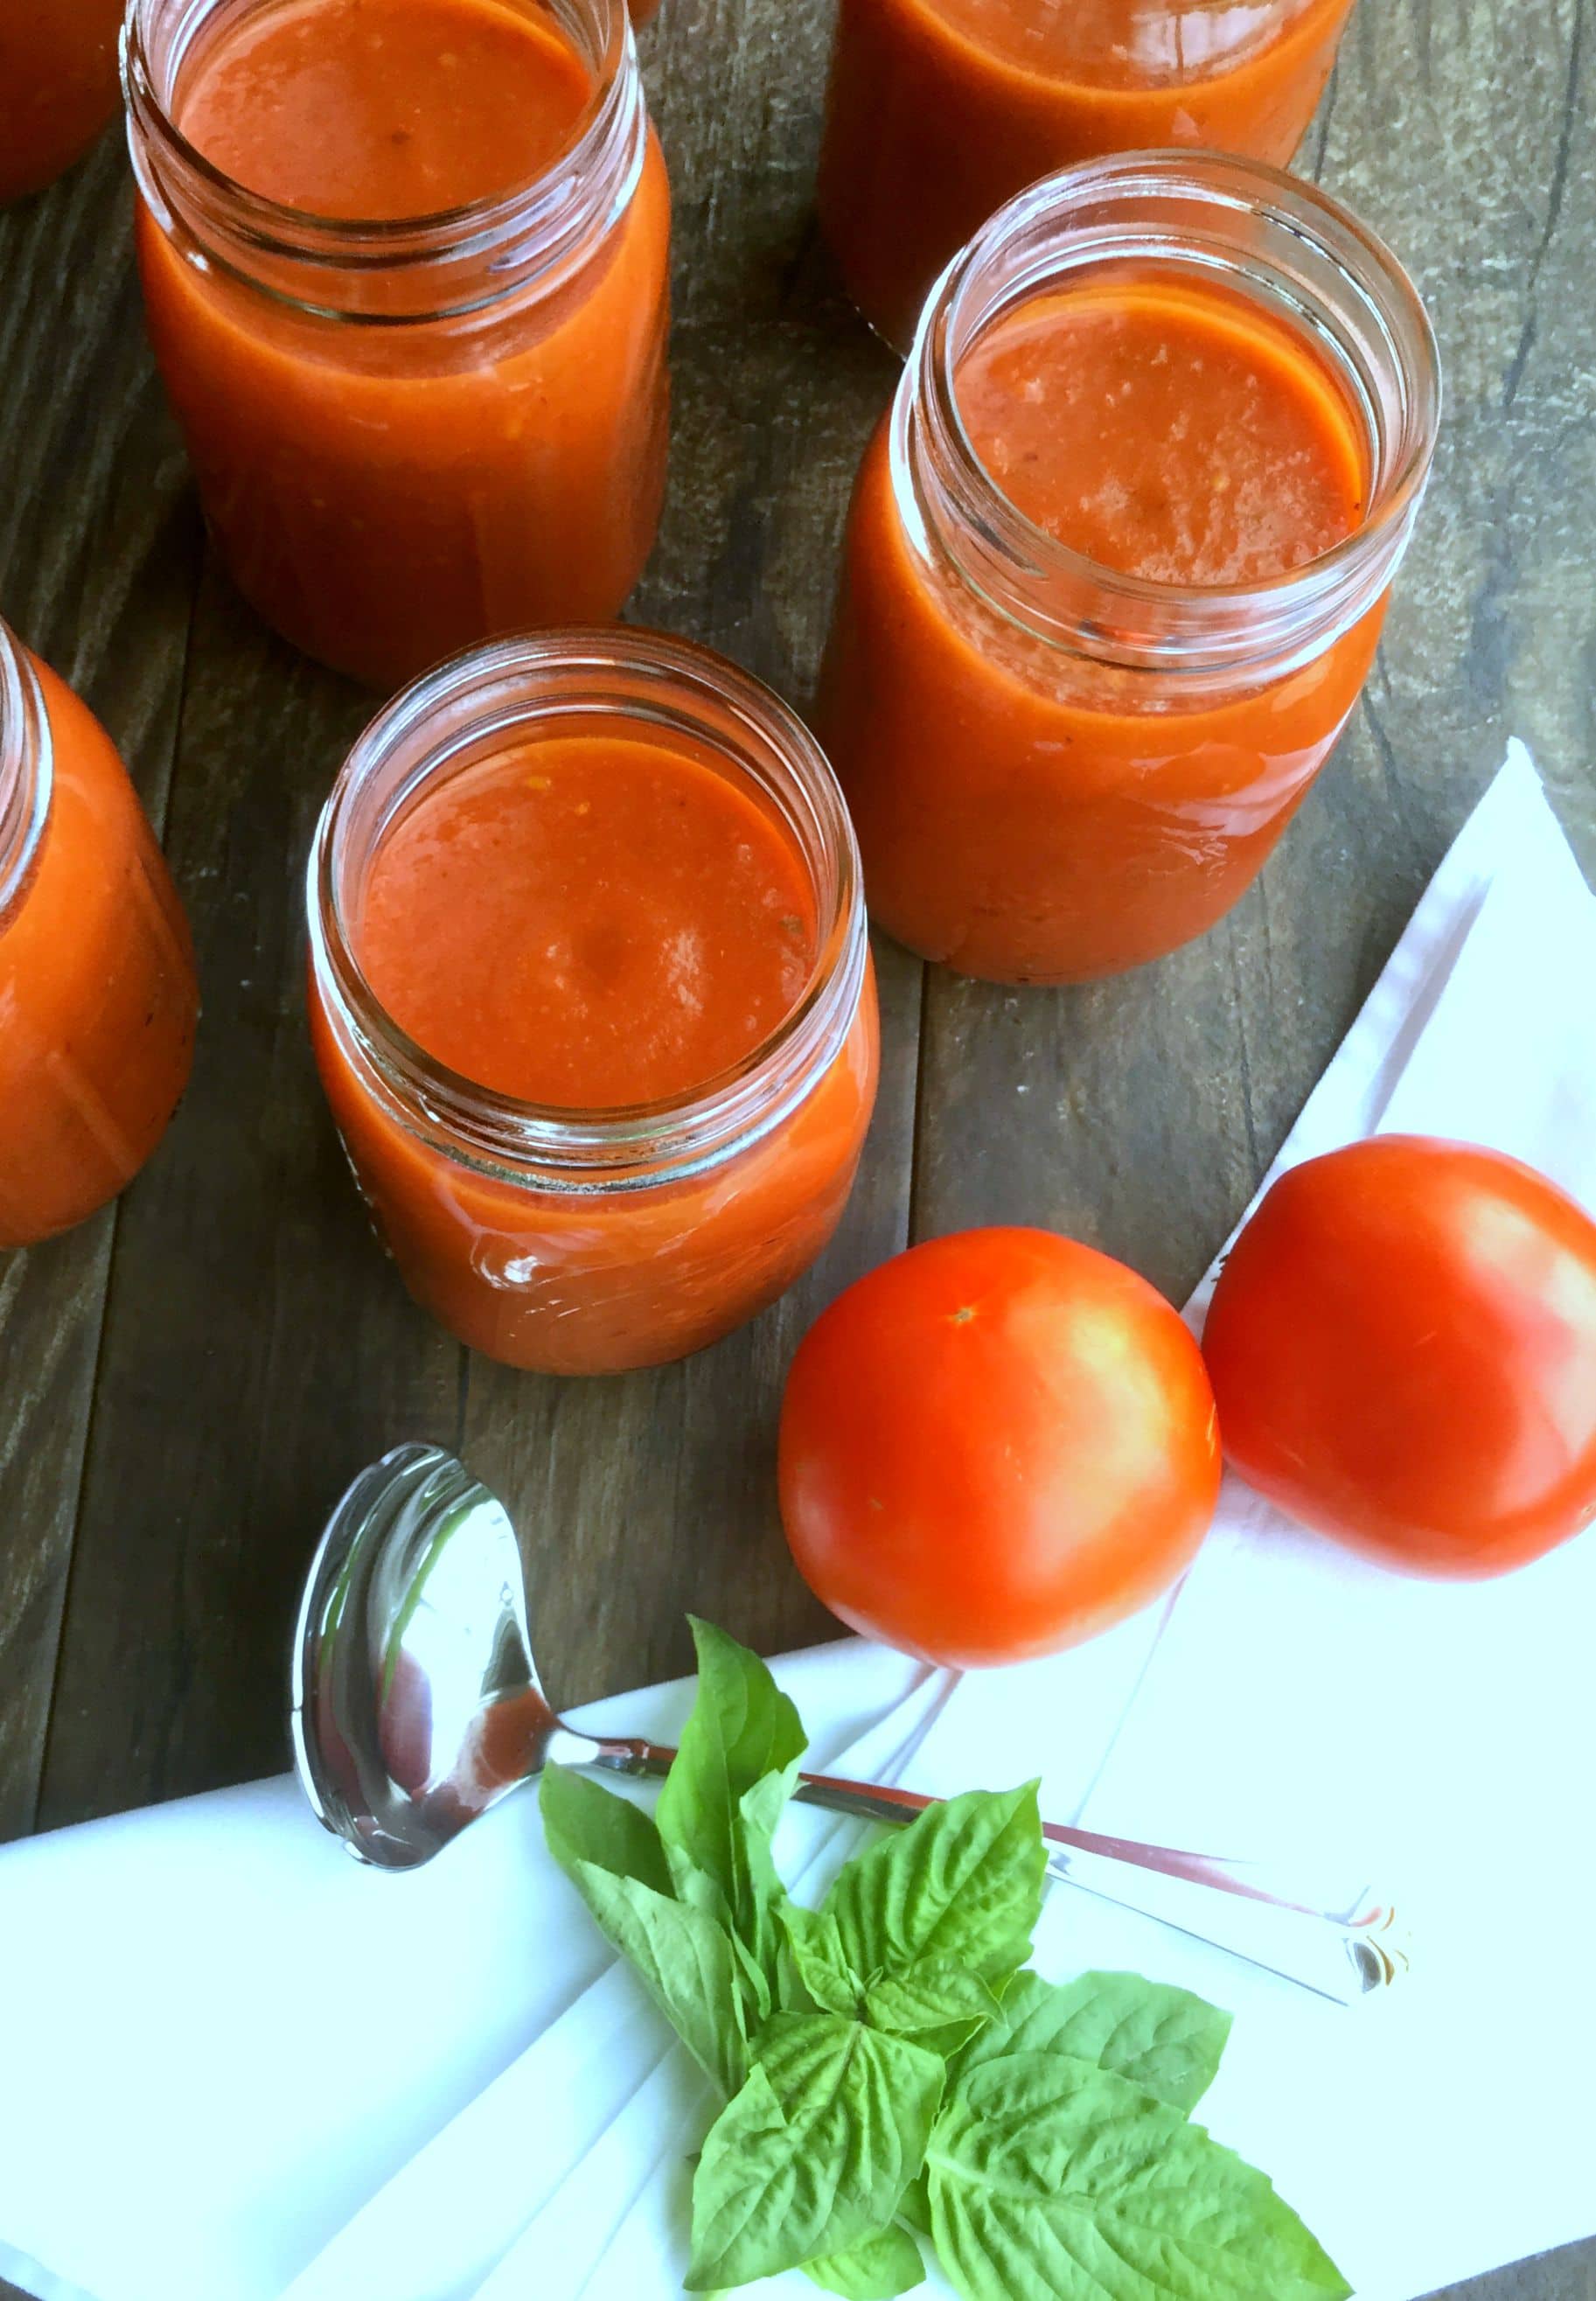 The ultimate signature roasted tomatoes sauce, flavorful in taste and rich in consistency. Make this easy sauce to use in hundreds of meals, or store and enjoy later.